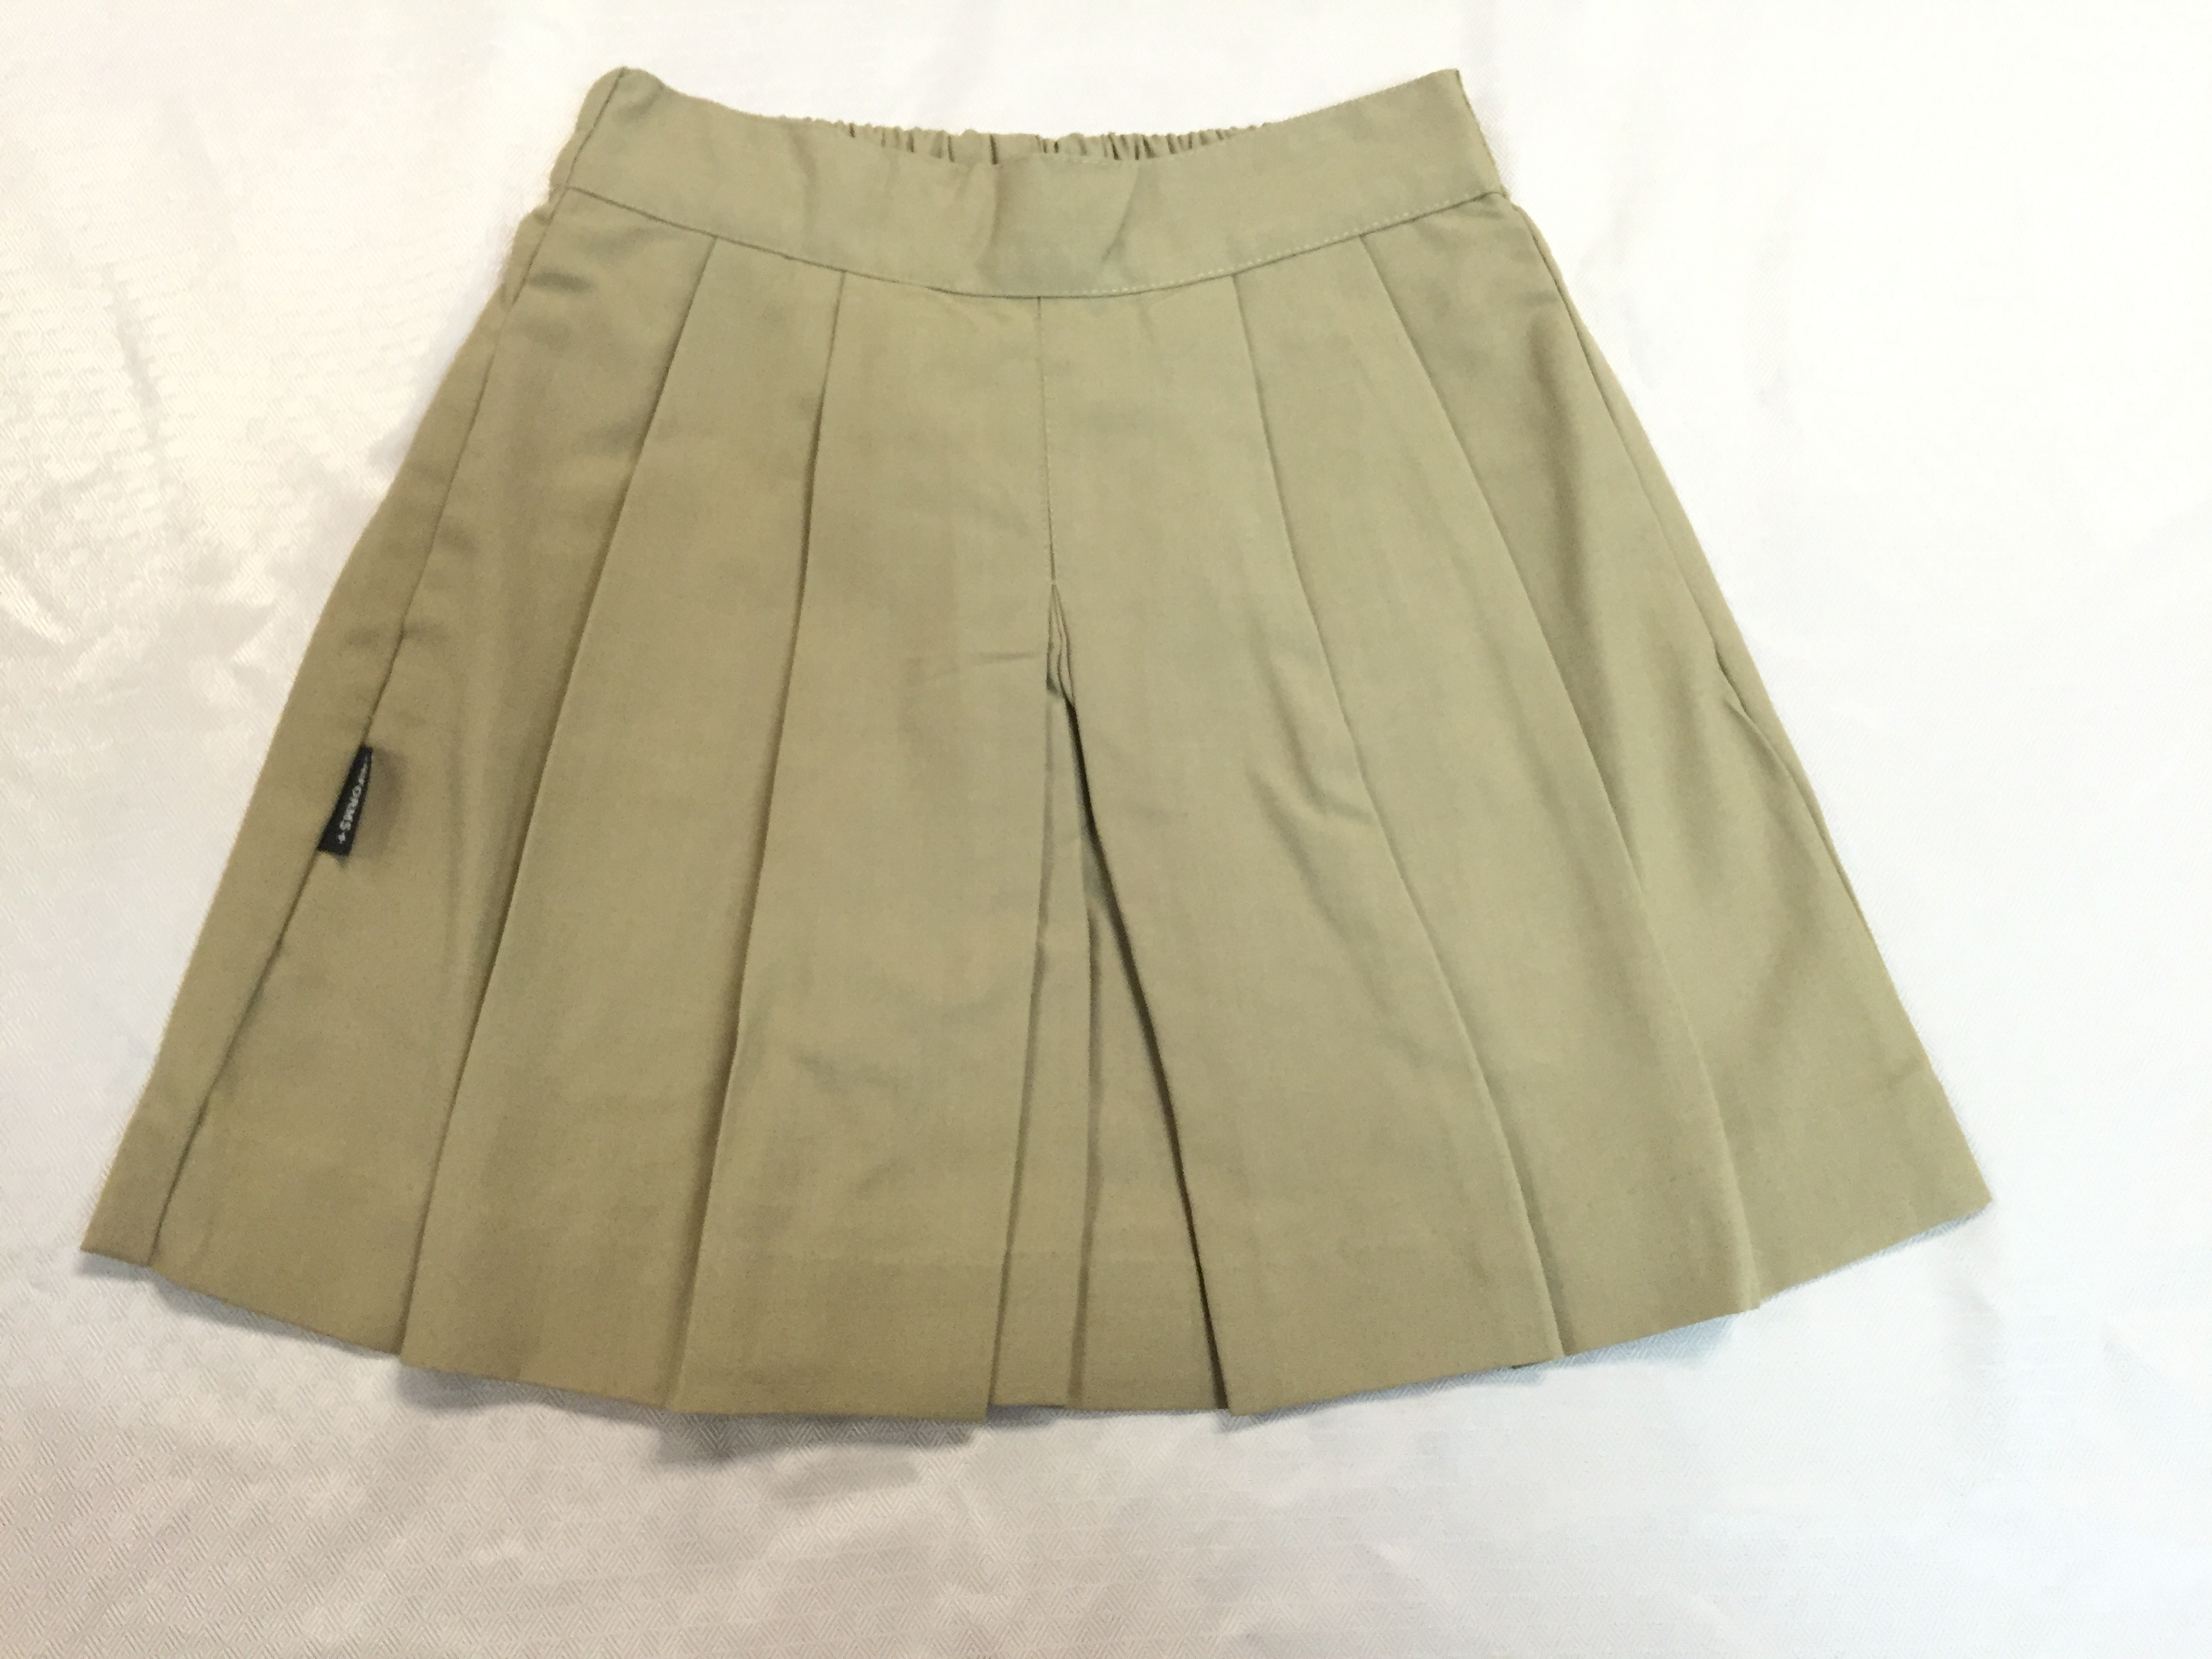 Clearance Pleated Culottes, Khaki – Sizes 2-7 Youth